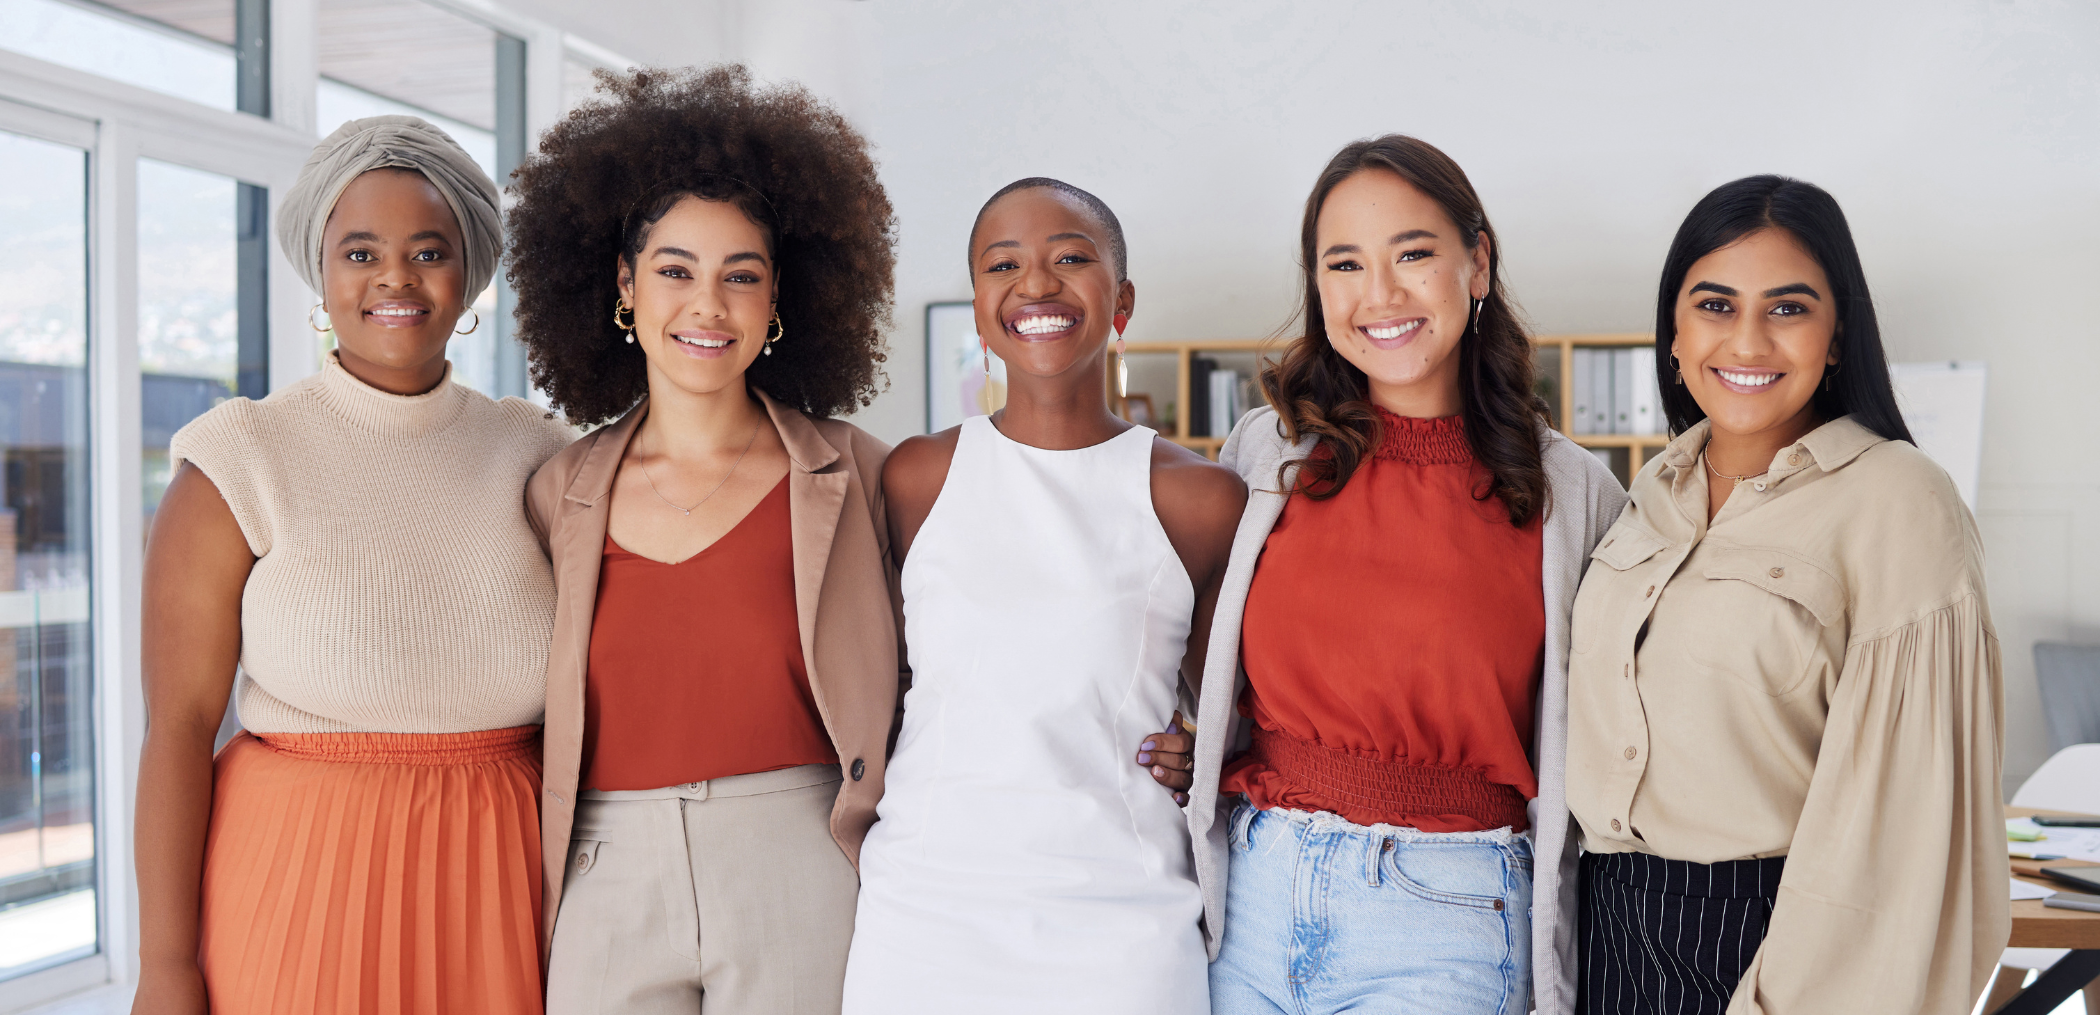 5 women with their arms around each other smiling in a business setting